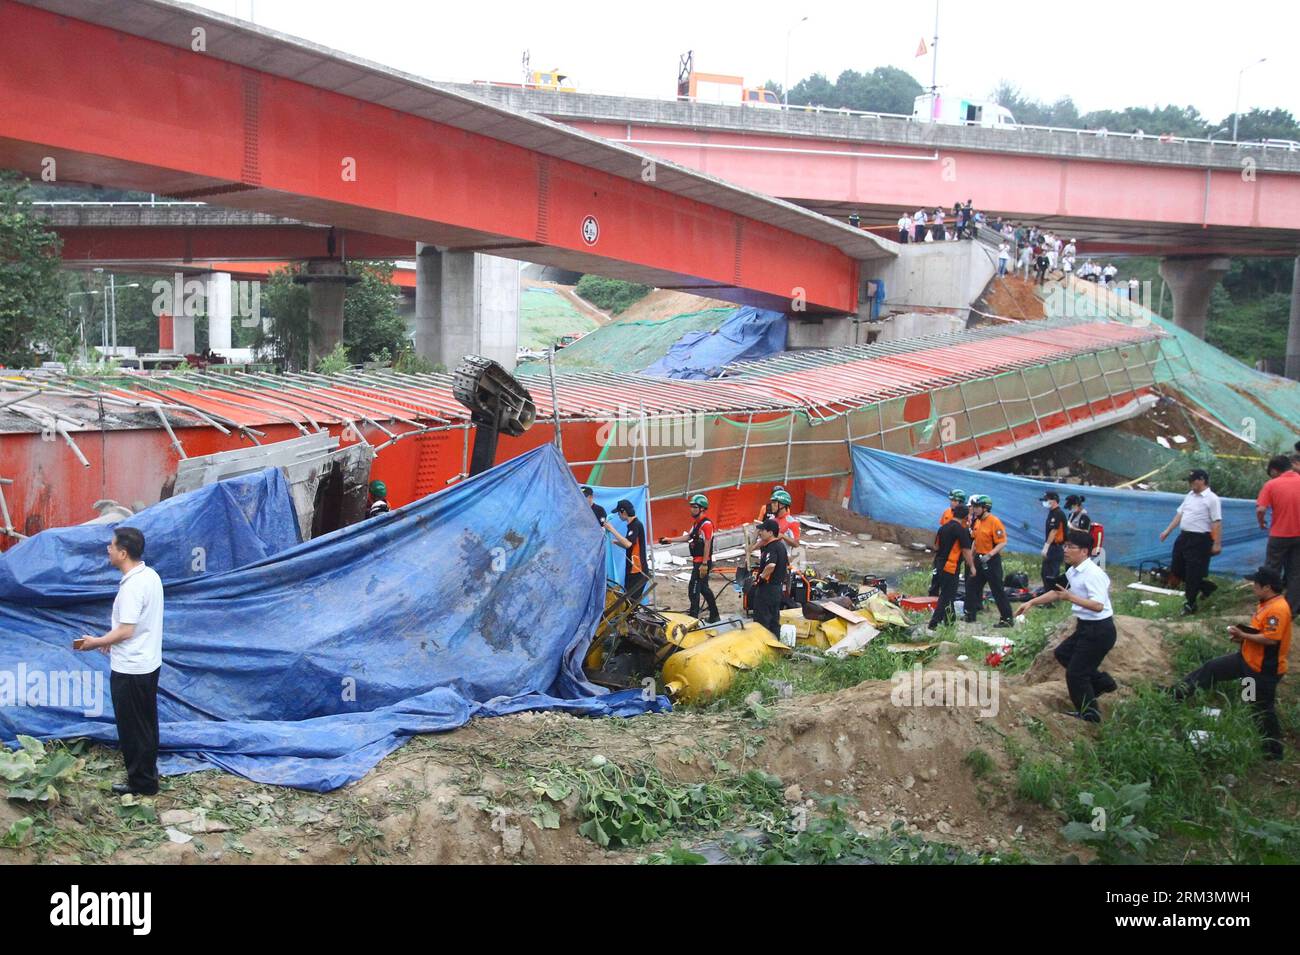 Bildnummer: 60247539  Datum: 30.07.2013  Copyright: imago/Xinhua (130730) -- SEOUL, July 30, 2013 (Xinhua) -- Rescuers work at the collapse site near the Banghwa Bridge in Seoul, South Korea, on July 30, 2013. Two Chinese workers were killed as a section of an under-construction ramp onto Banghwa Bridge collapsed Tuesday, according to Yonhap. (Xinhua/Yao Qilin)(bxq) SOUTH KOREA-SEOUL-COLLAPSE PUBLICATIONxNOTxINxCHN Gesellschaft Einsturz Brücke Brückeneinsturz premiumd x0x xkg 2013 quer      60247539 Date 30 07 2013 Copyright Imago XINHUA  Seoul July 30 2013 XINHUA Rescue Work AT The Collapse S Stock Photo